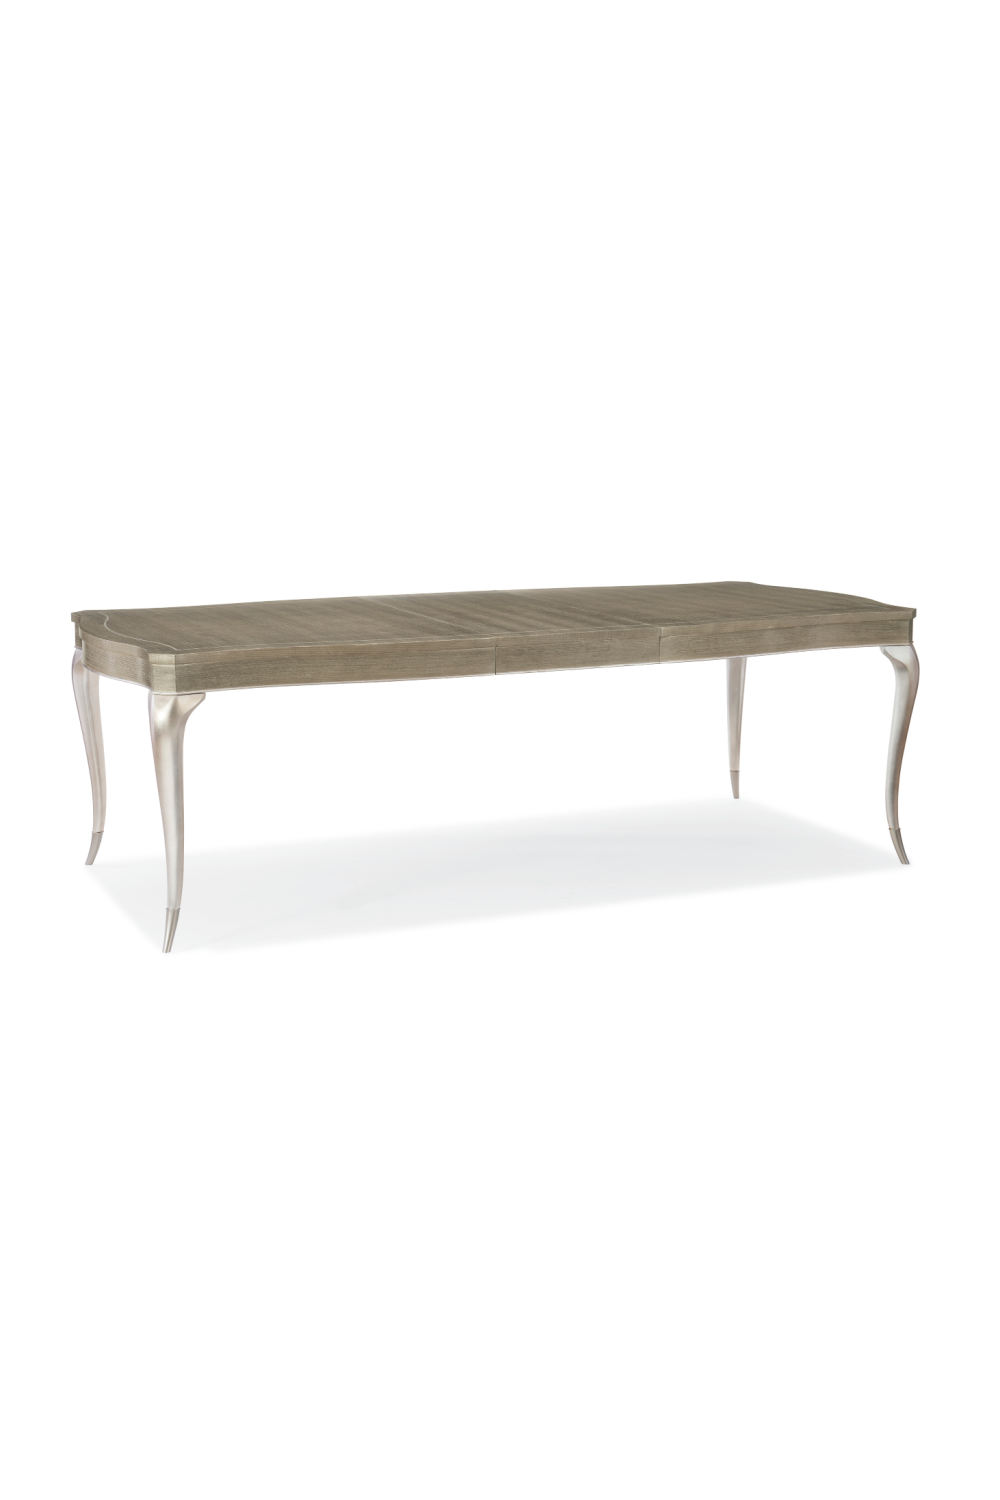 Silver Trimmed Extendable Dining Table | Caracole Avondale | Oroa.com